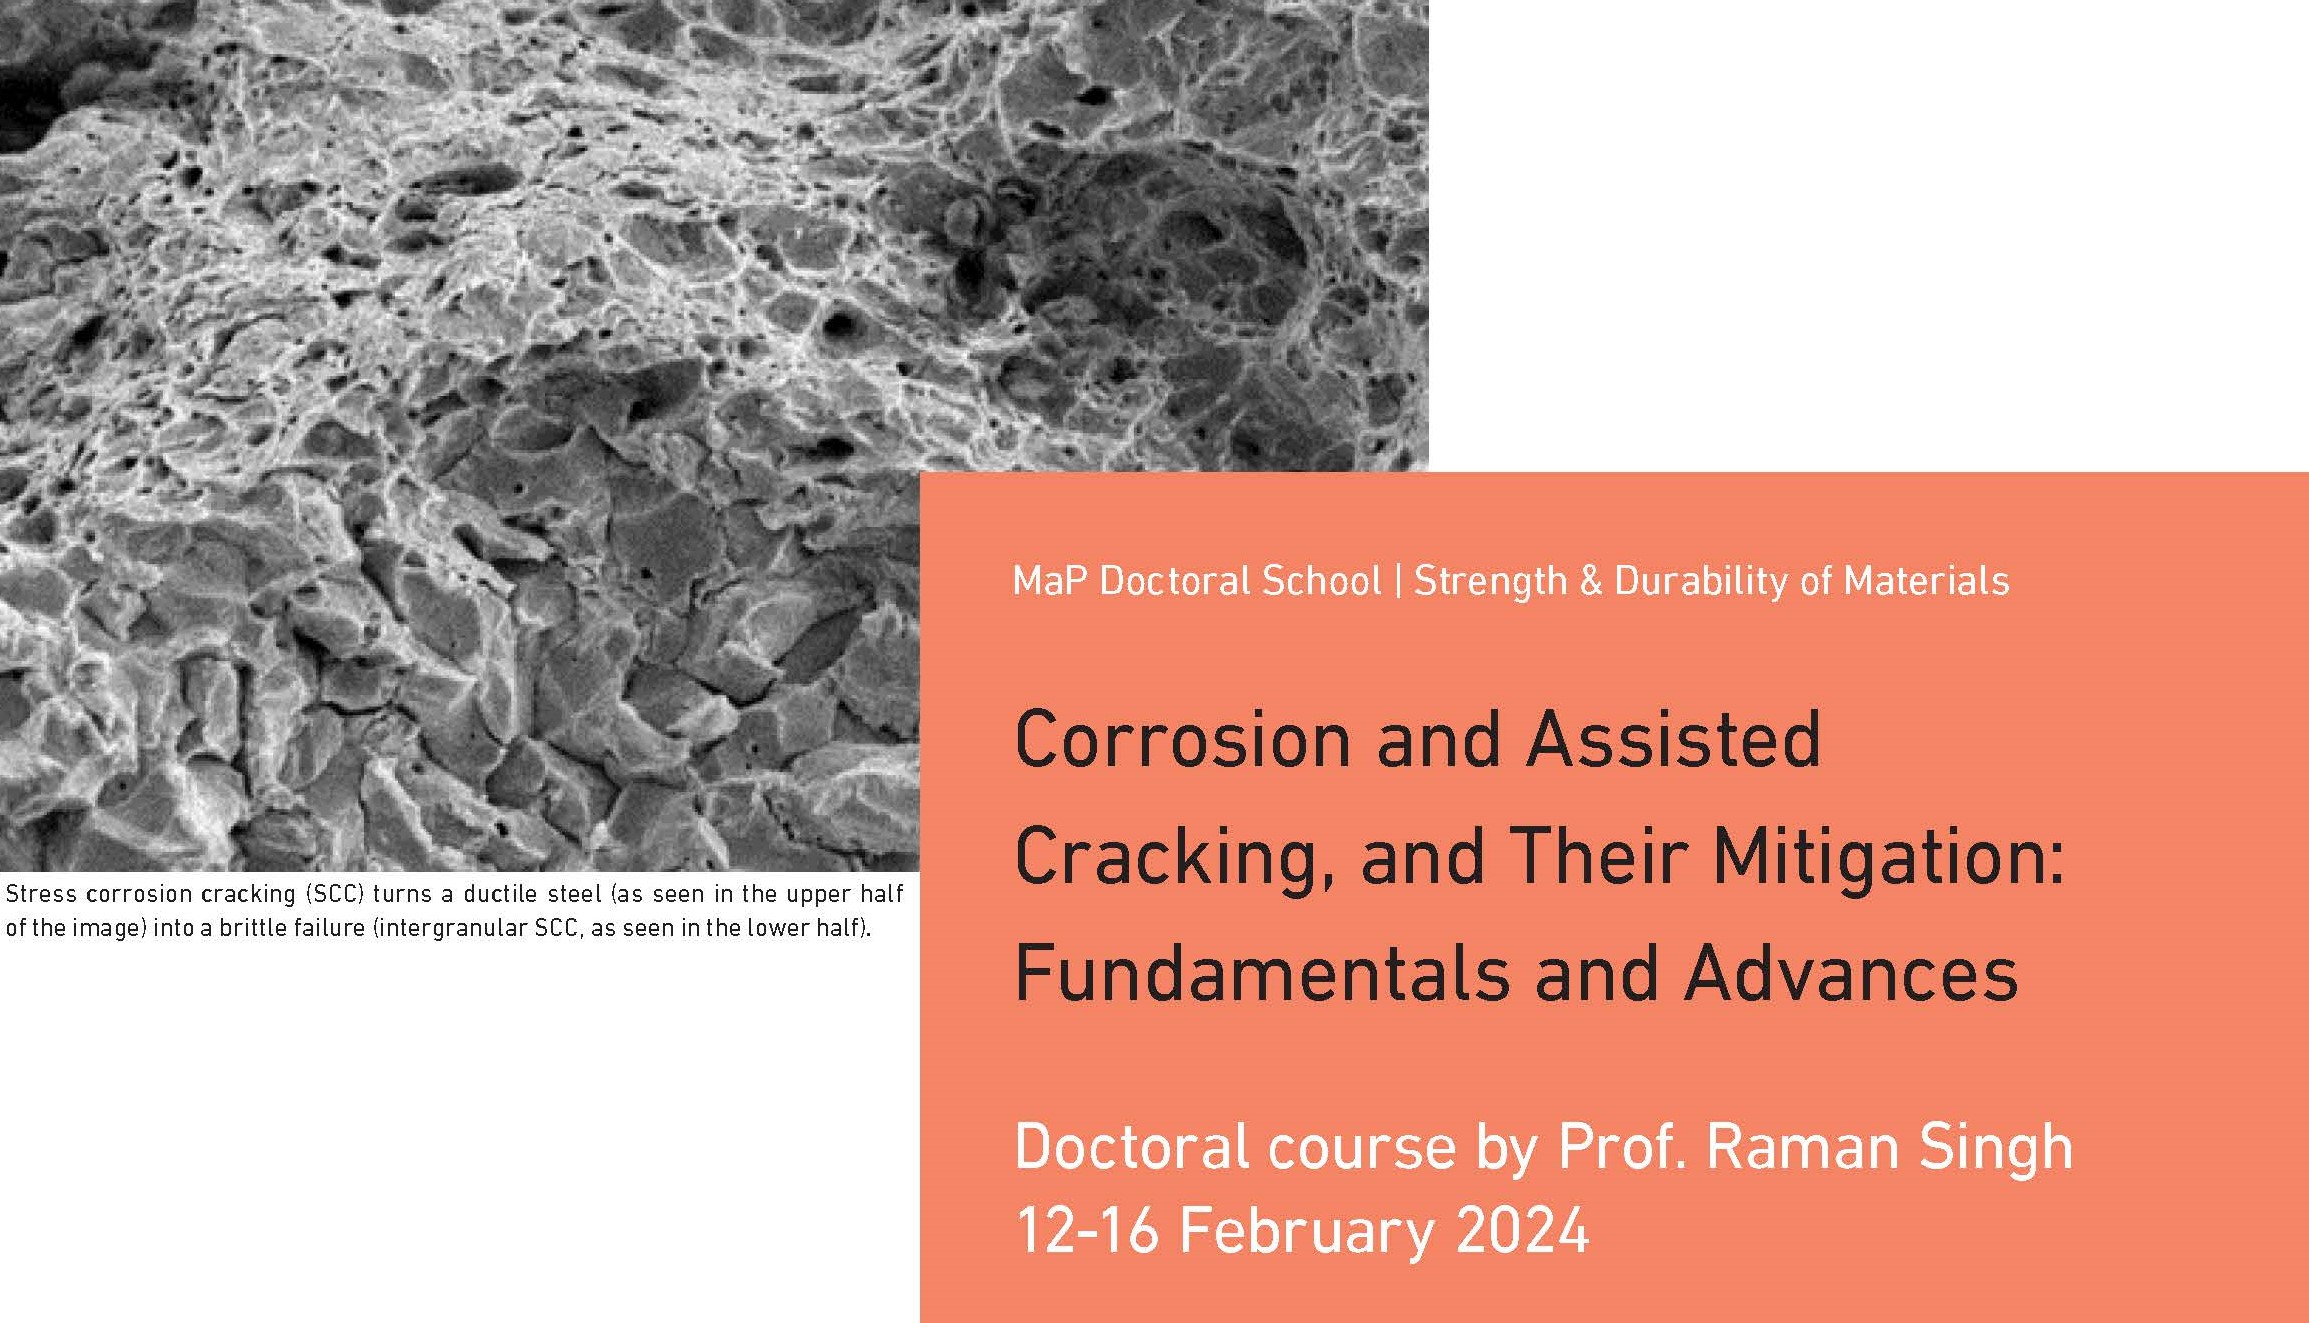 MaP Doctoral School | Corrosion course